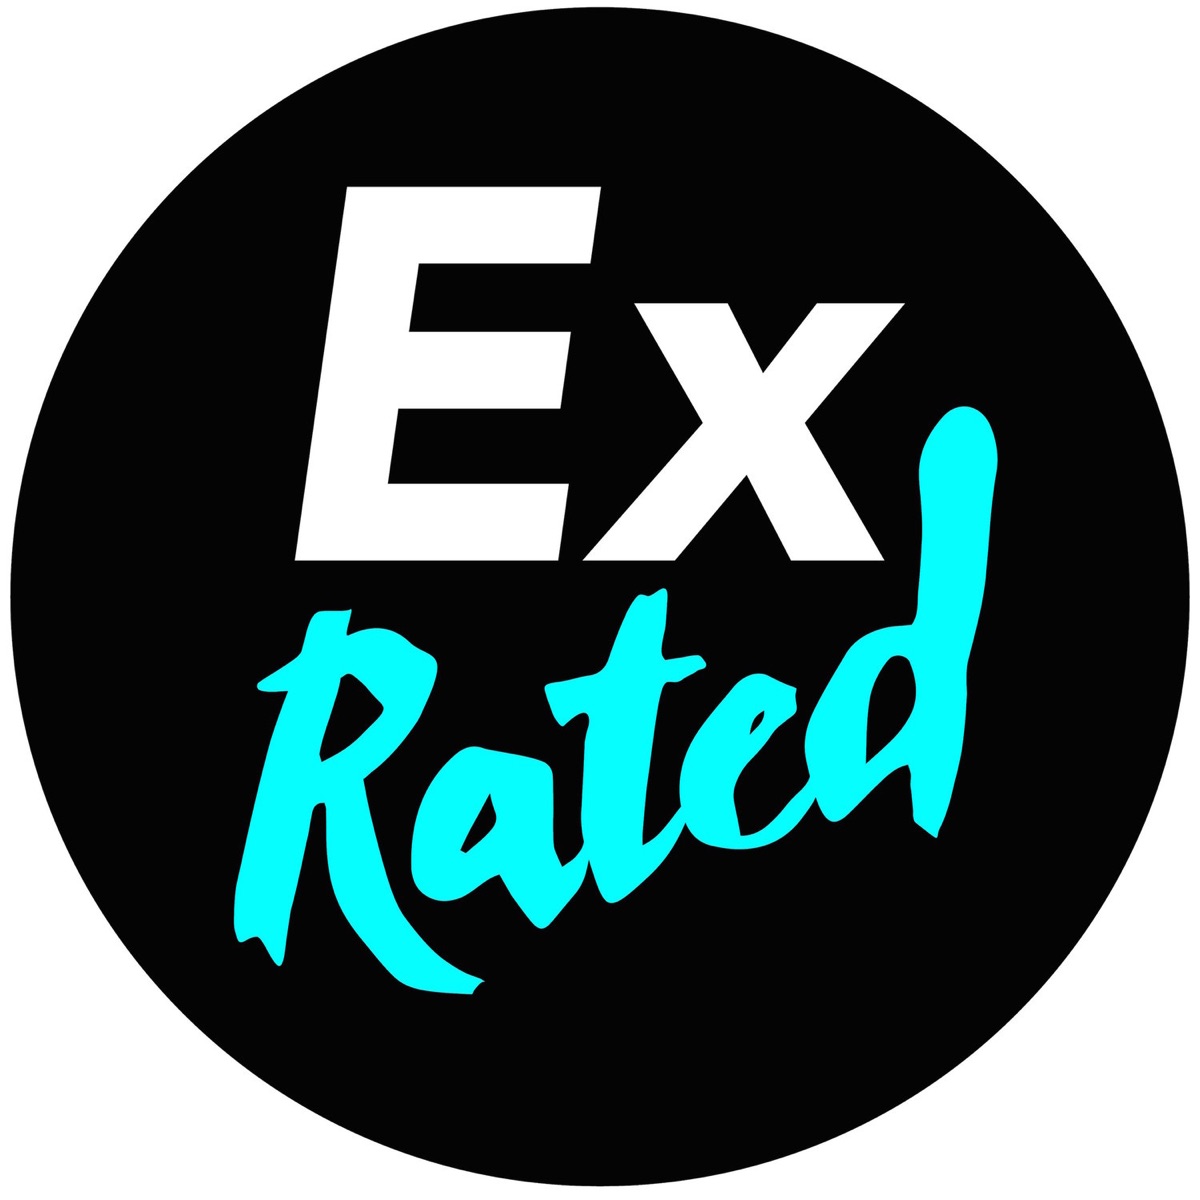 Rated movies. §Éx.